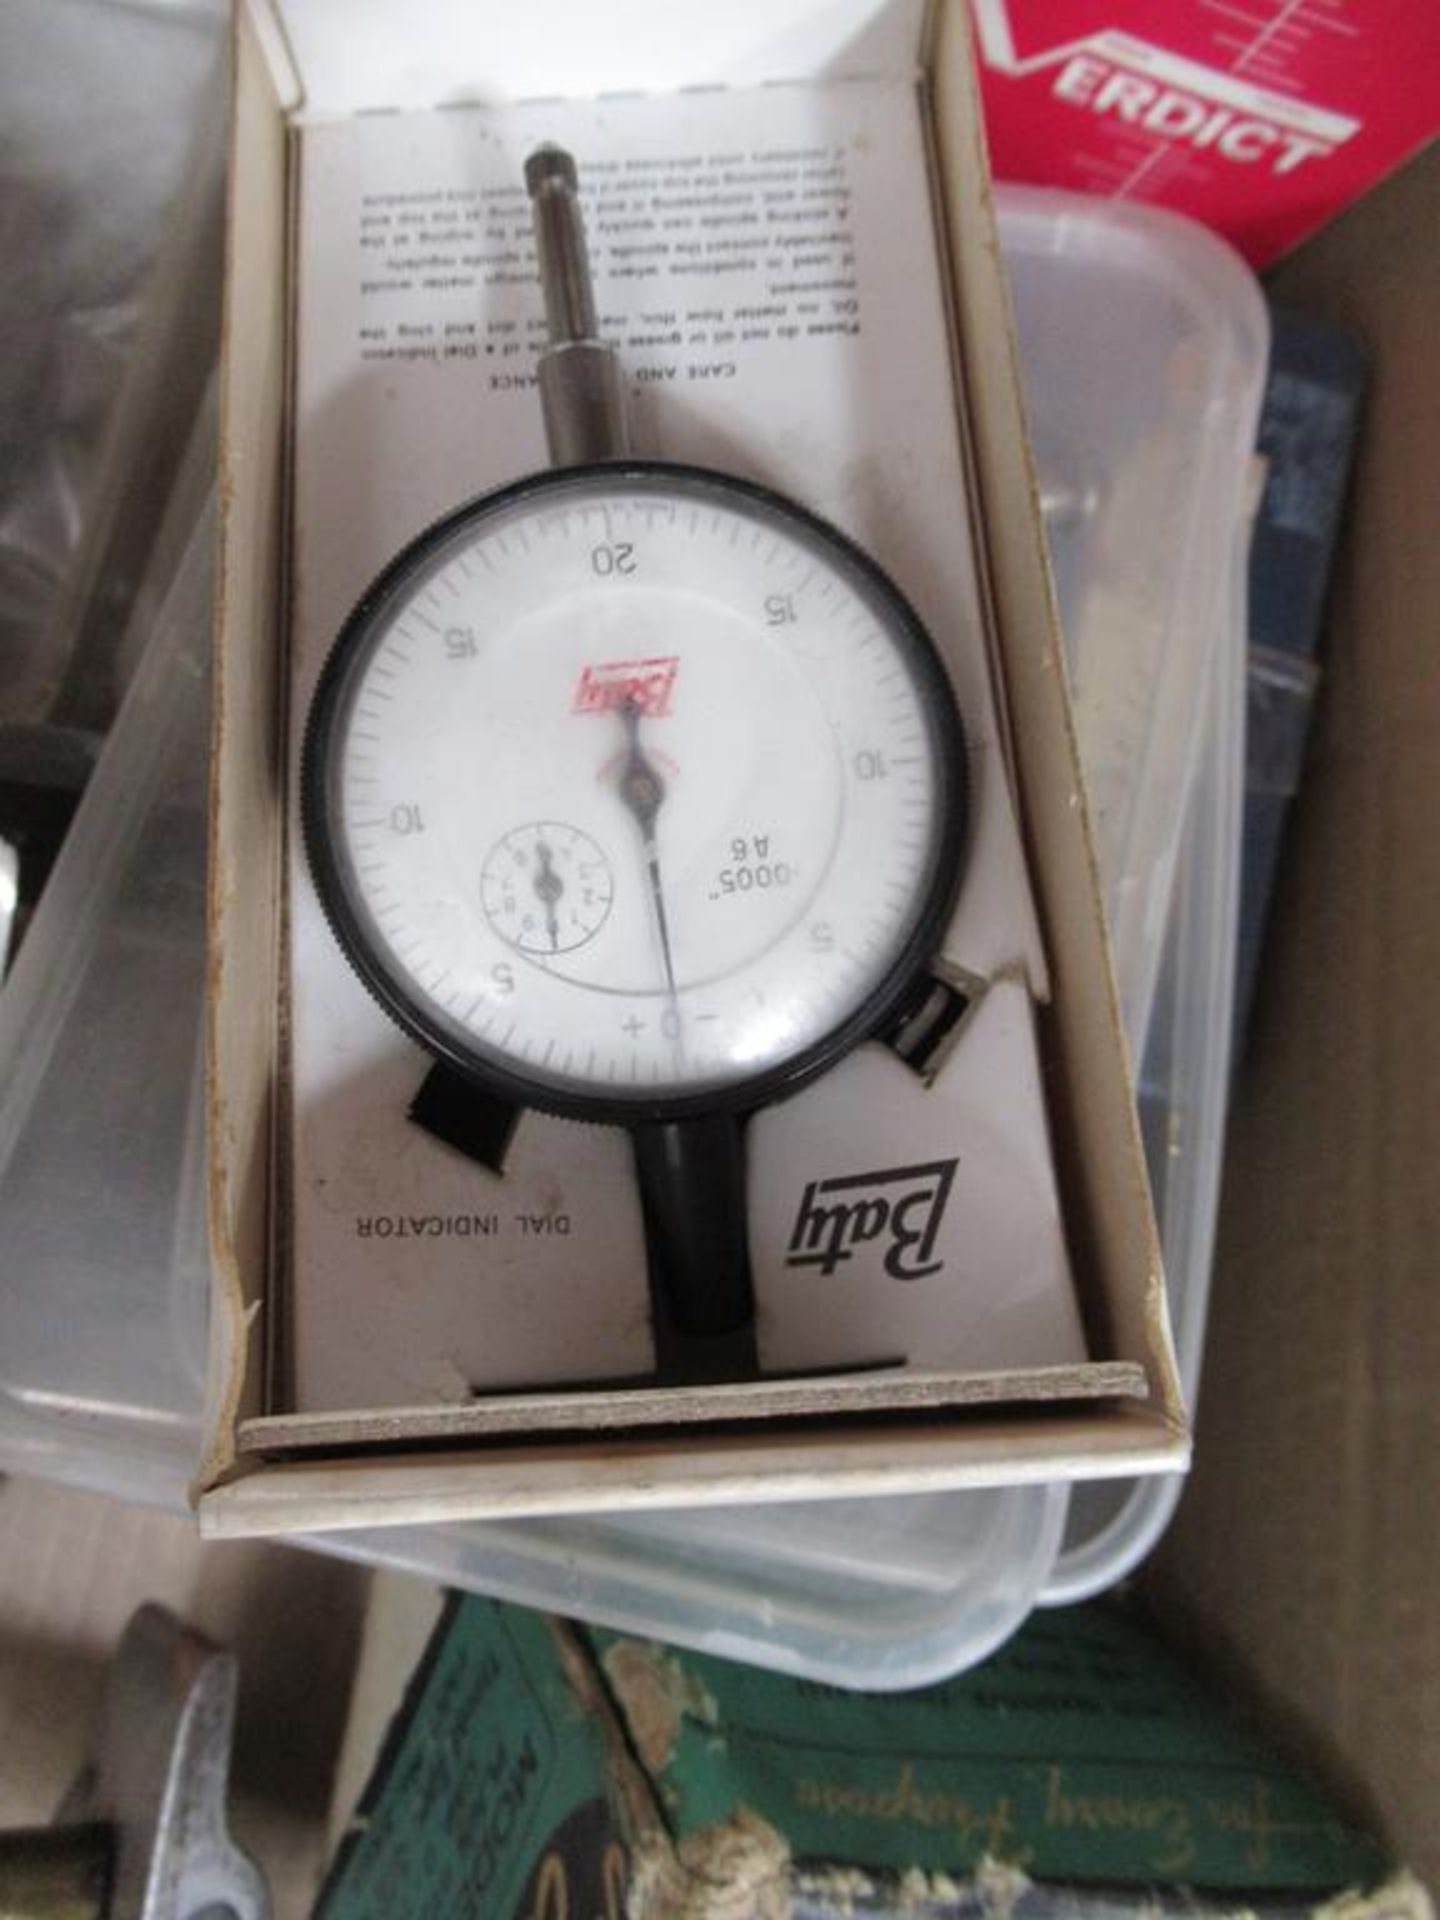 Box to contain various model making Gauges, Tools and other Metal Working Equipment - Image 6 of 7